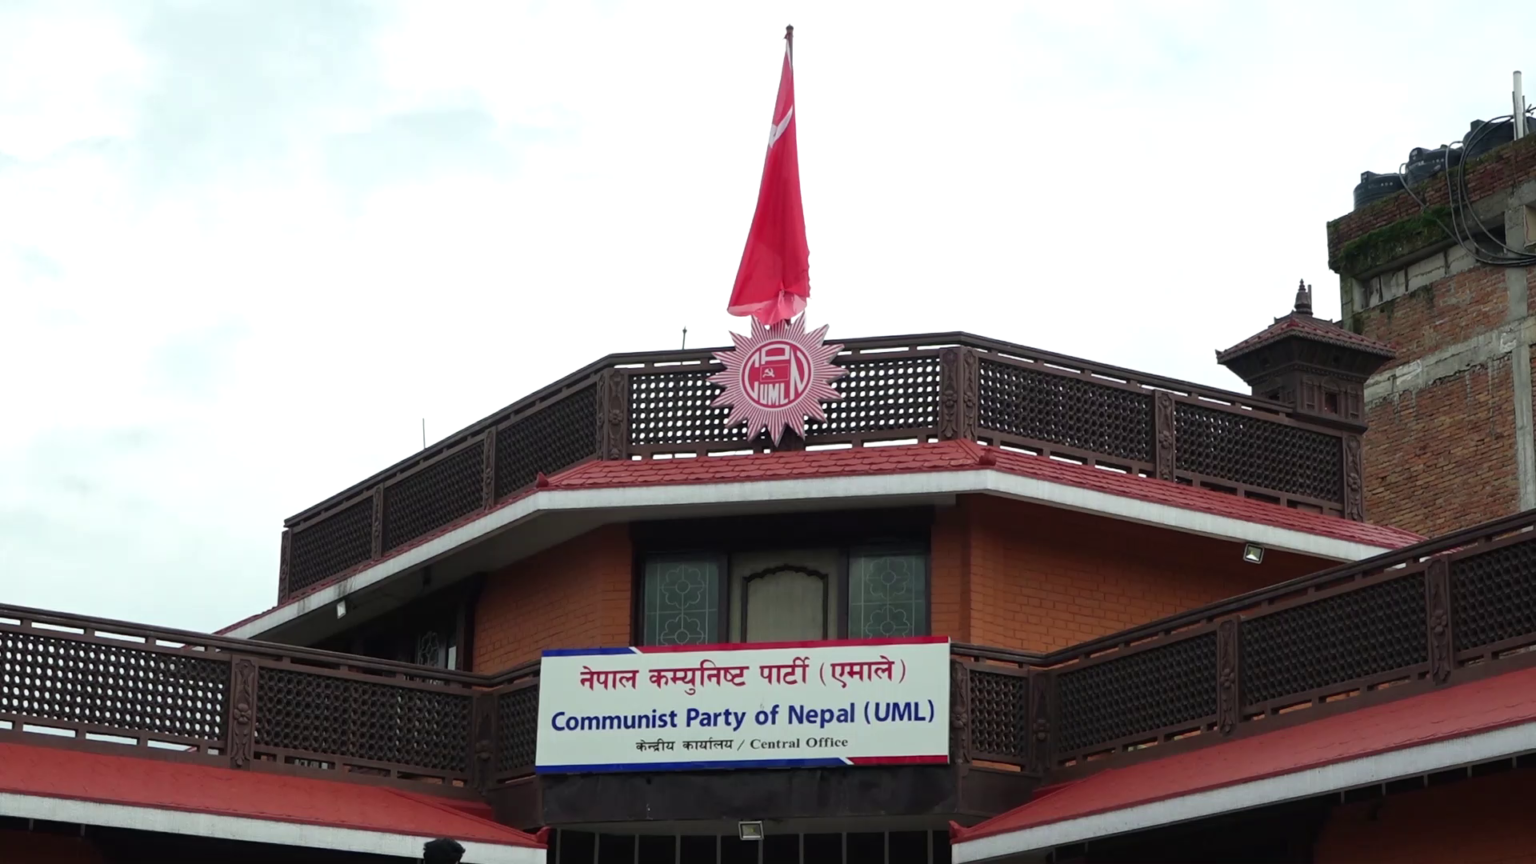 Members registered before mid-April qualify as delegates to UML’s 10th General Convention